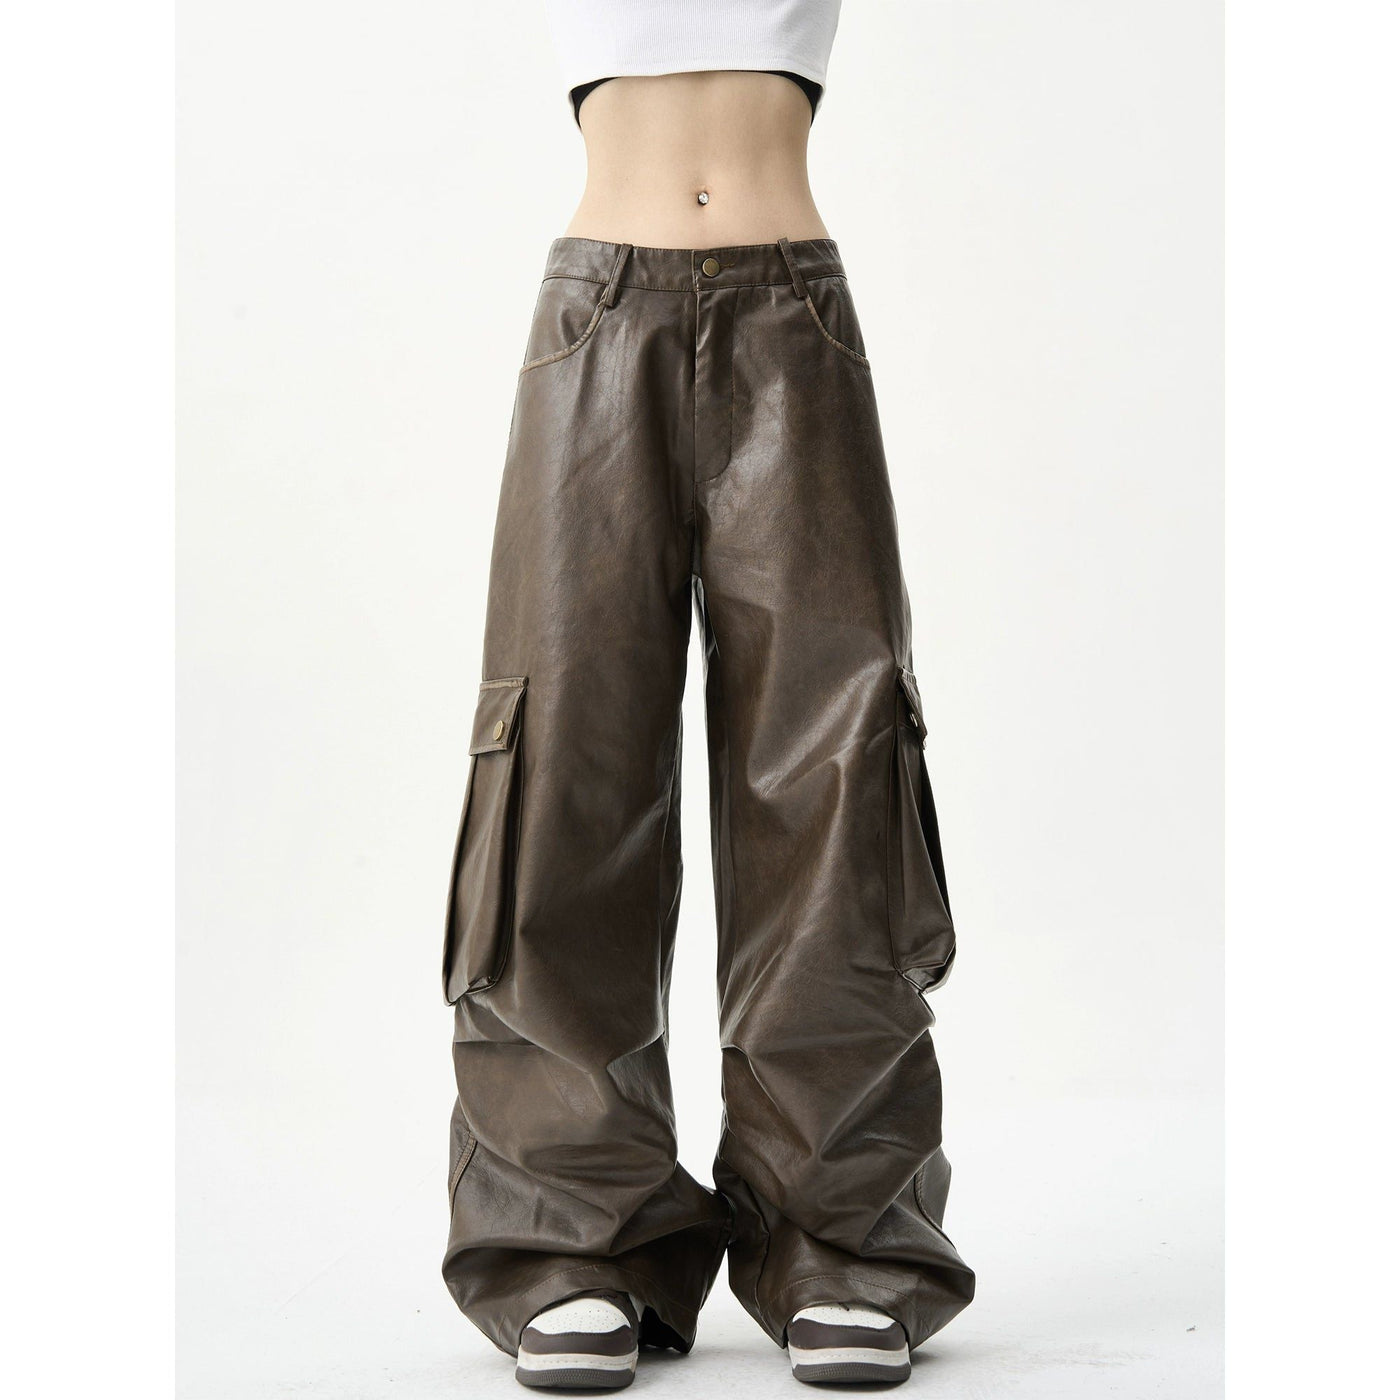 Oversized Pocket PU Leather Cargo Pants Korean Street Fashion Pants By MaxDstr Shop Online at OH Vault